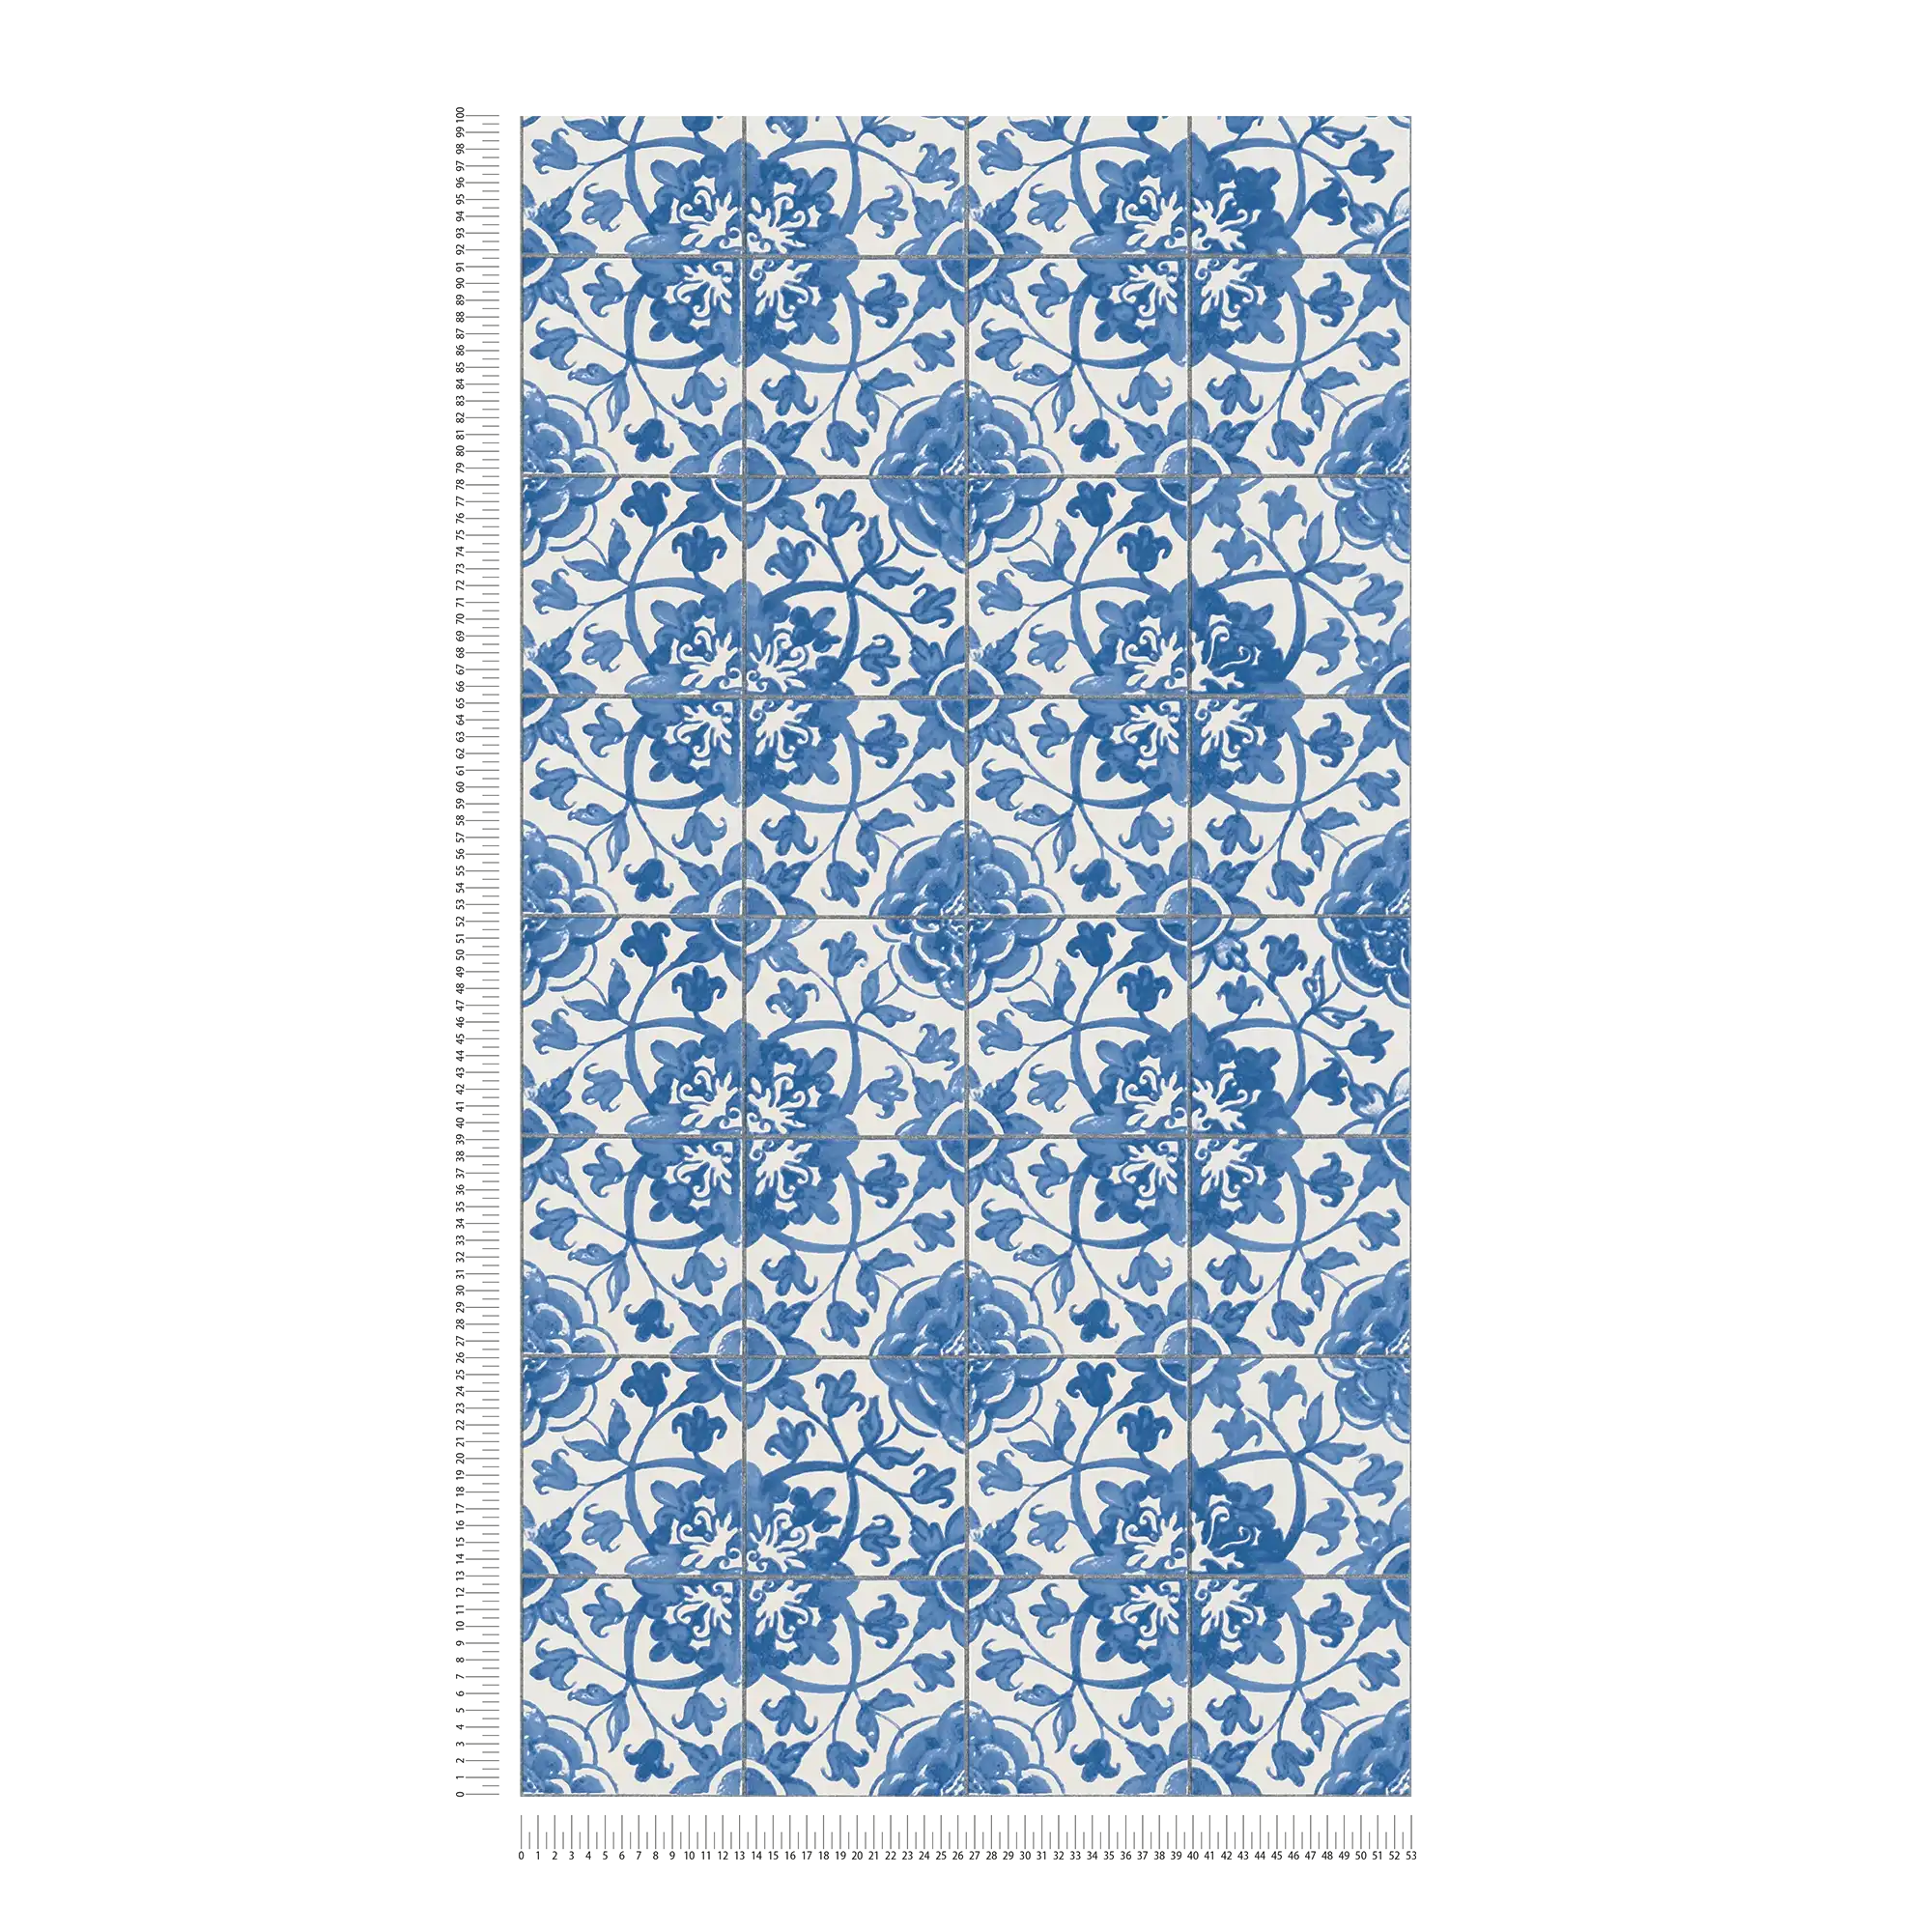             Self-adhesive wallpaper | tile look in vintag style - blue, white
        